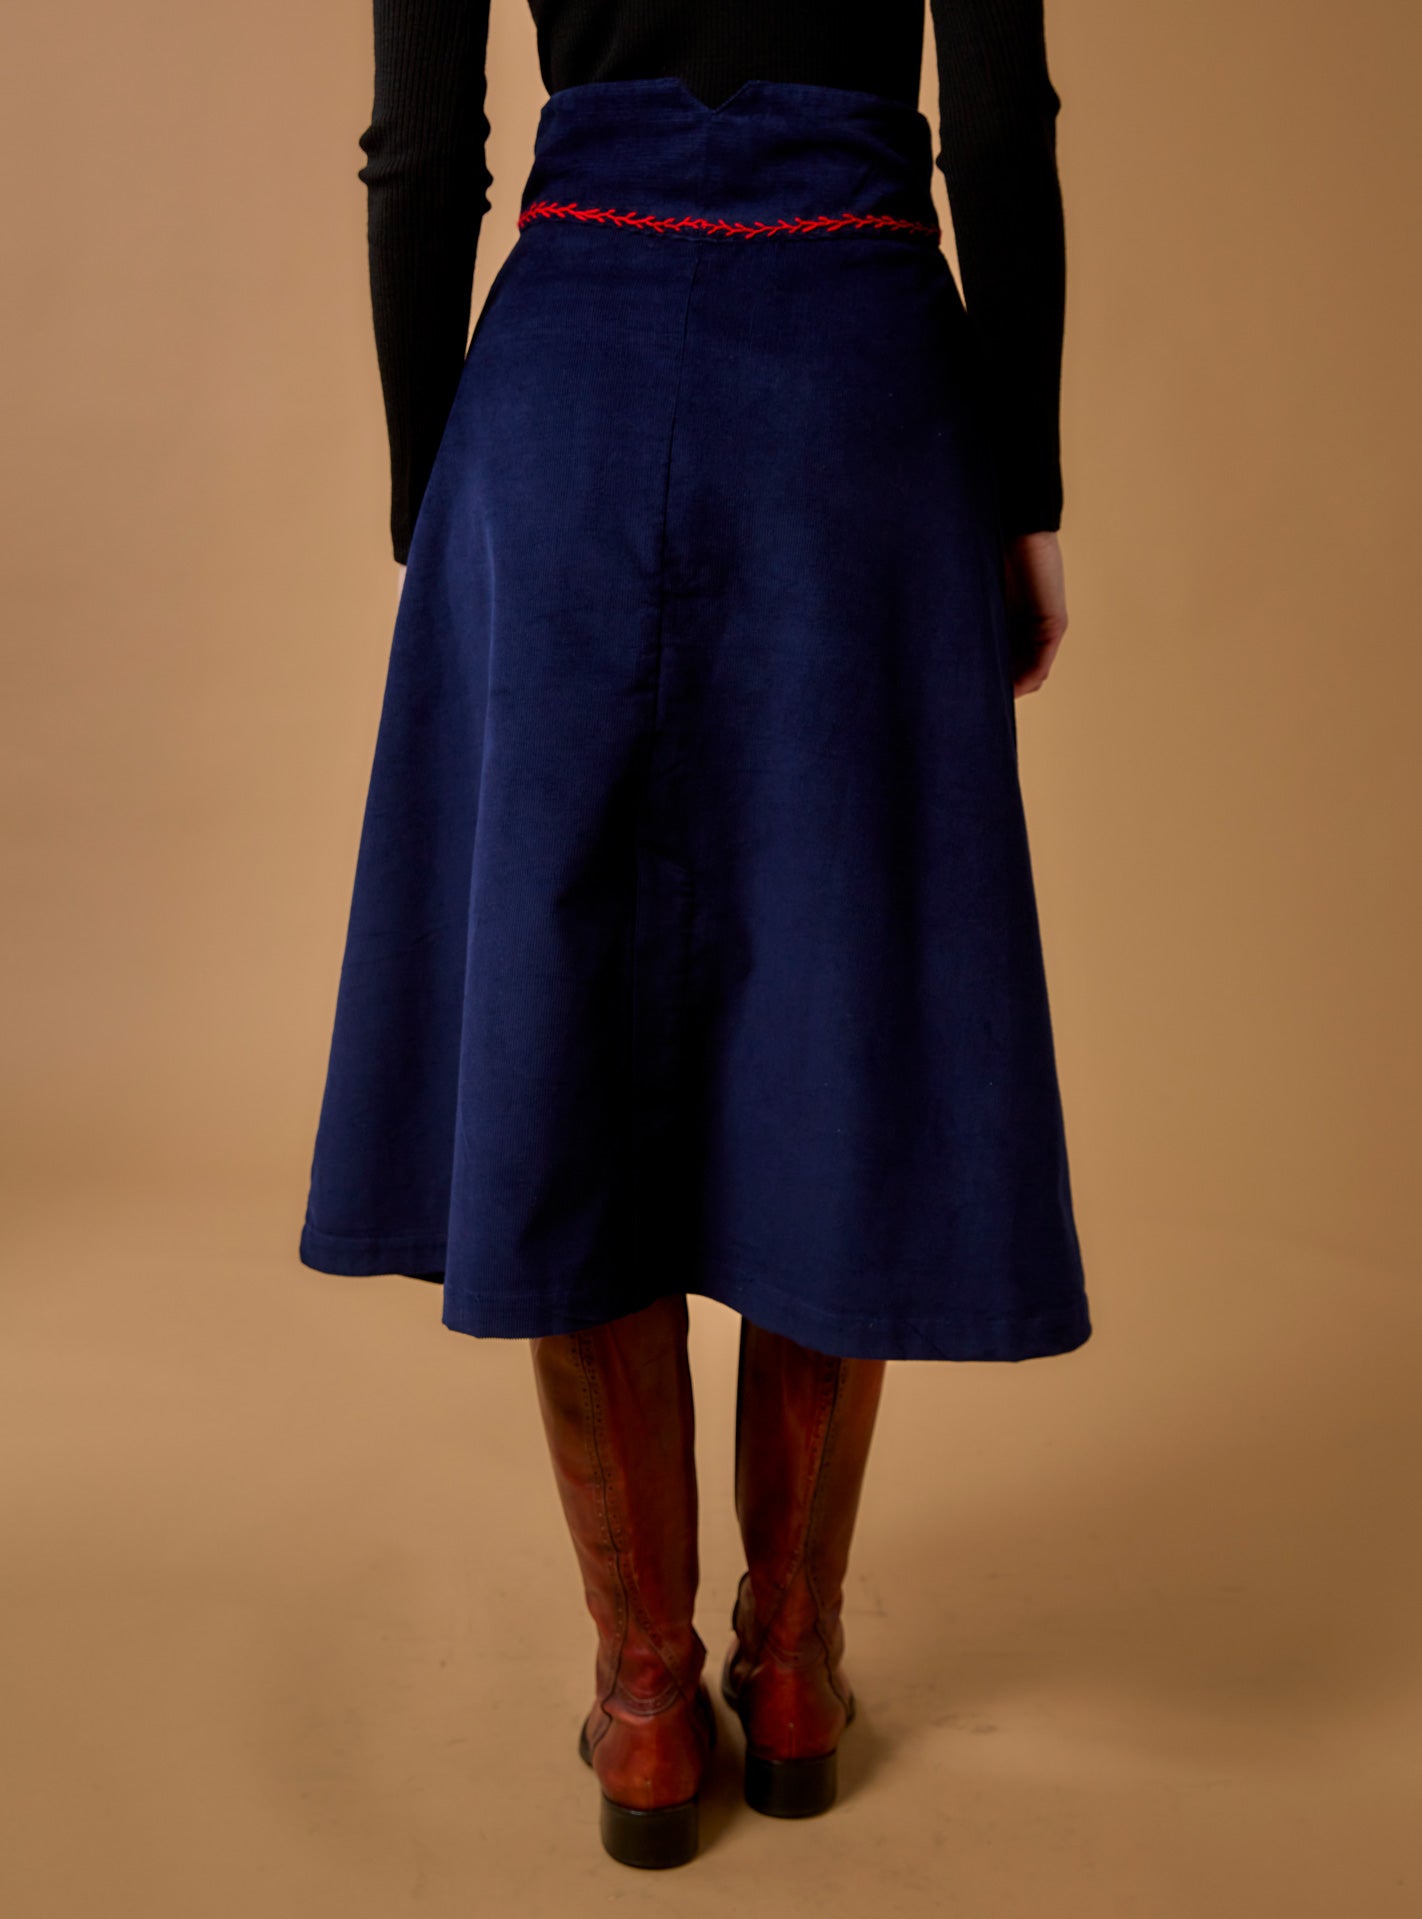 Back view of Yardley Navy/Red Skirt - Embroidered Corduroy by Thierry Colson